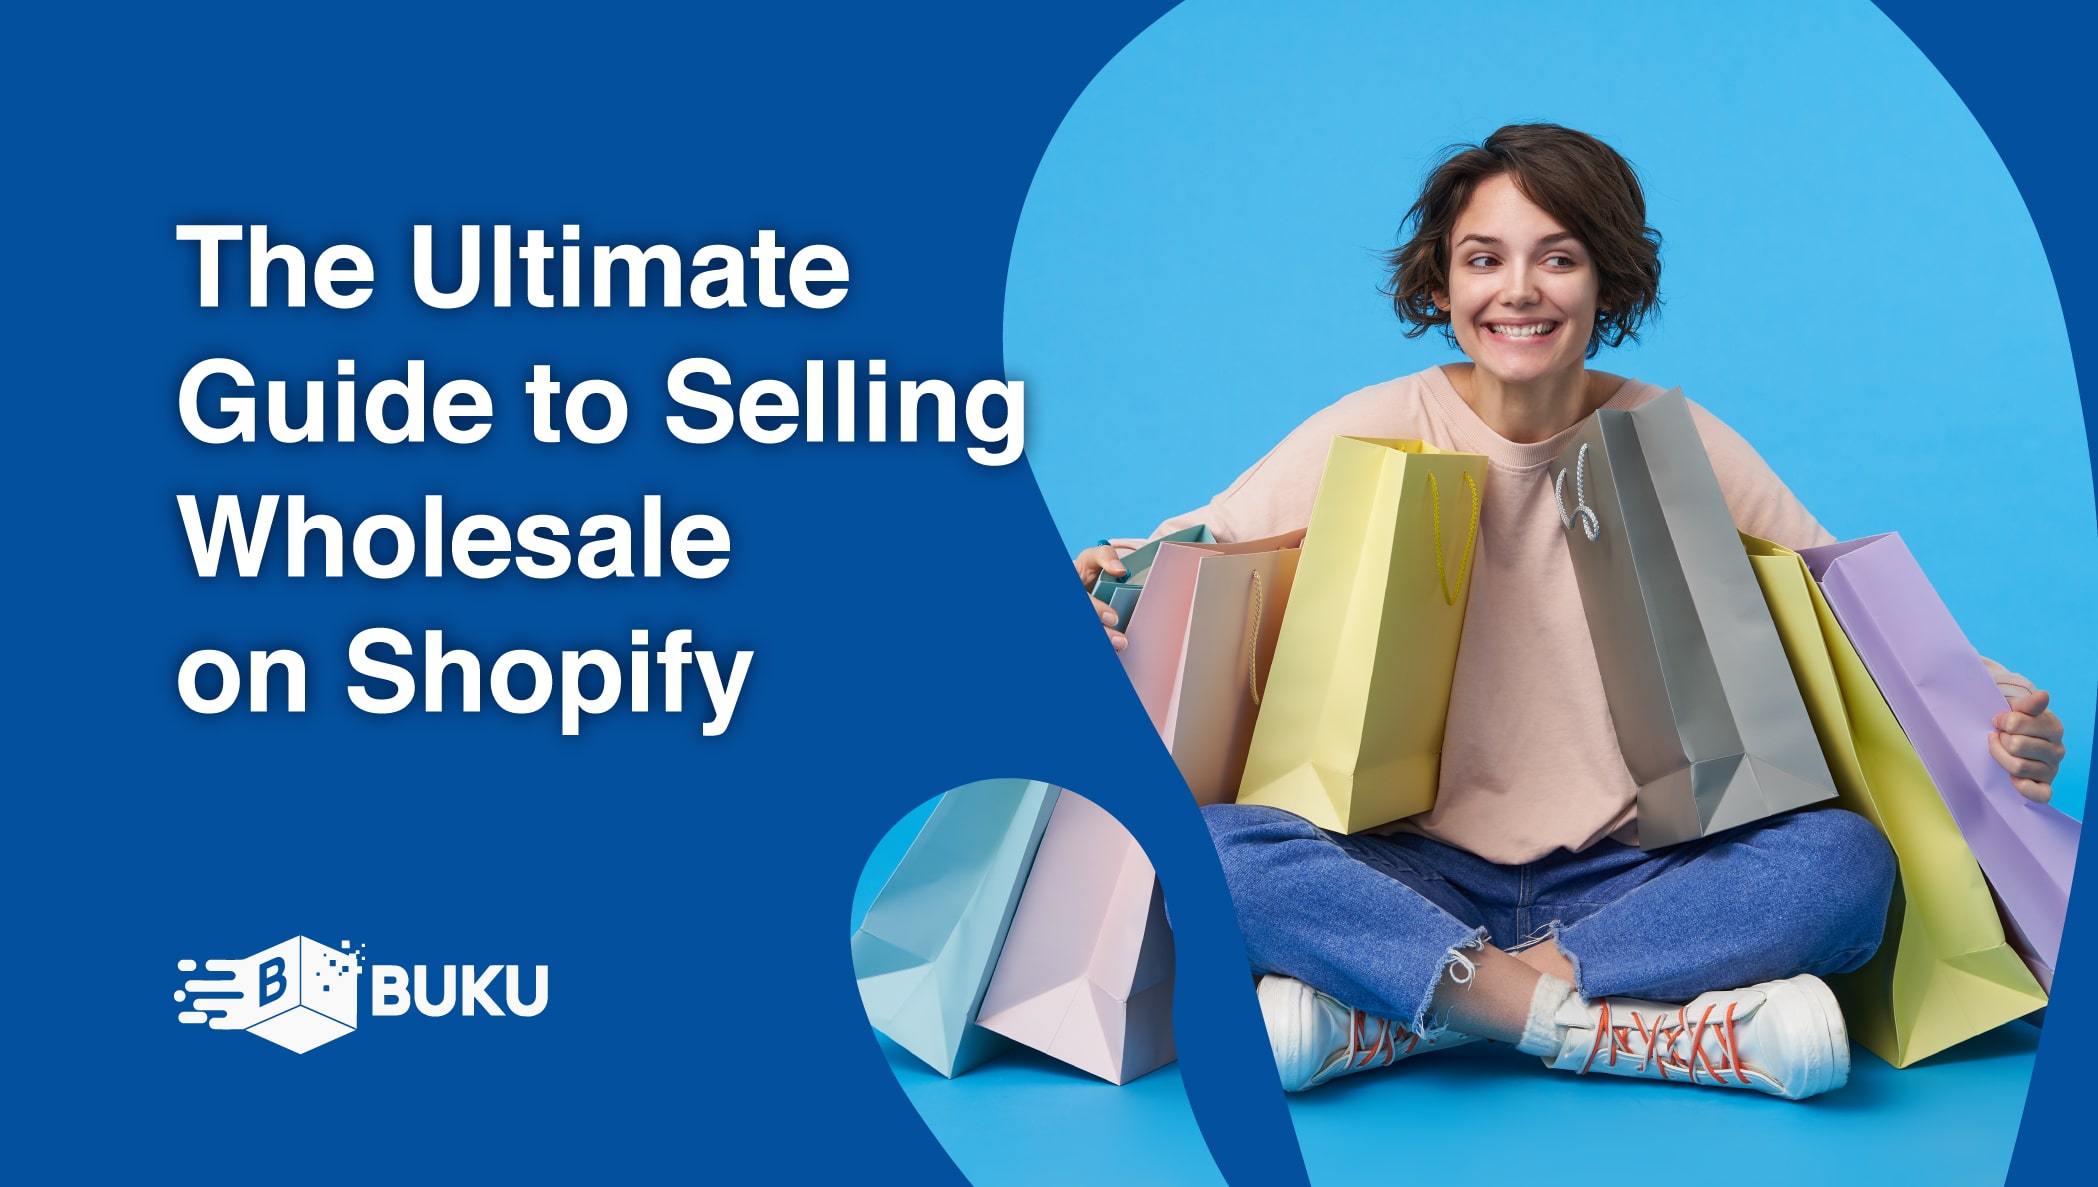 The ultimate guide to selling wholesale on Shopify